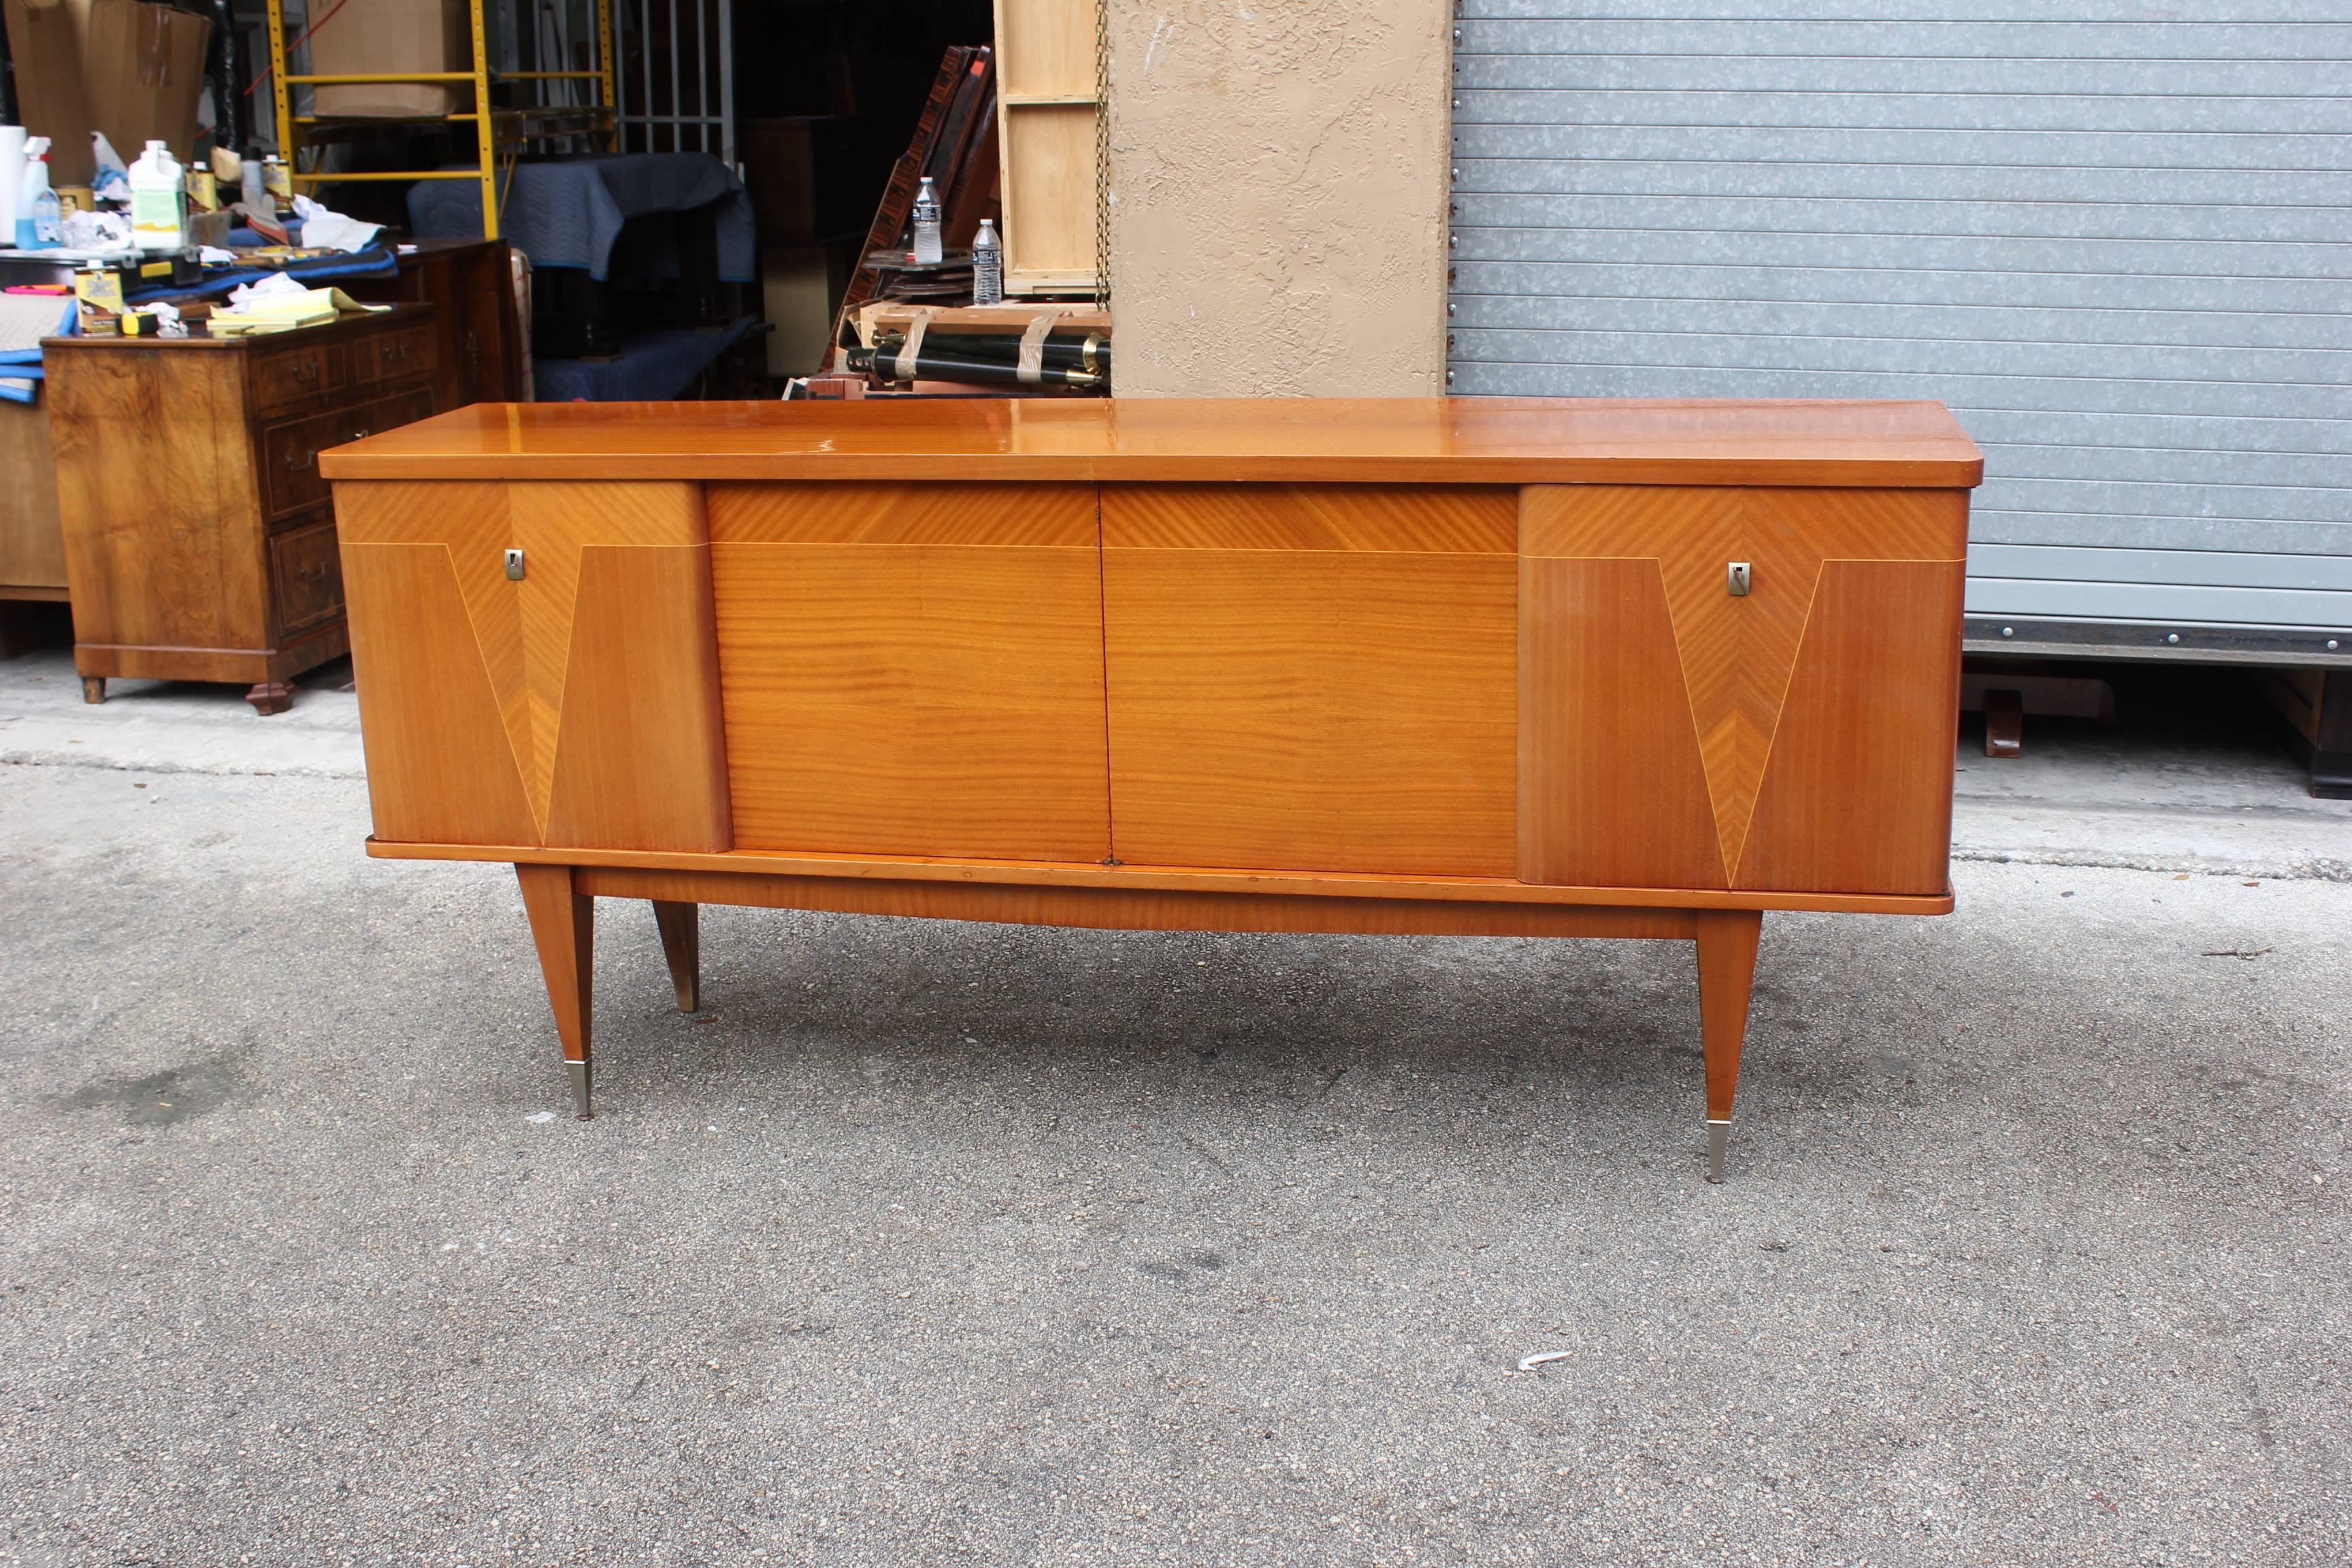 French Art Deco flame mahogany "V" sideboard or buffet high gloss finish, circa 1940s. Please note these sideboard or buffets can be taken apart to accommodate elevator needs if necessary.